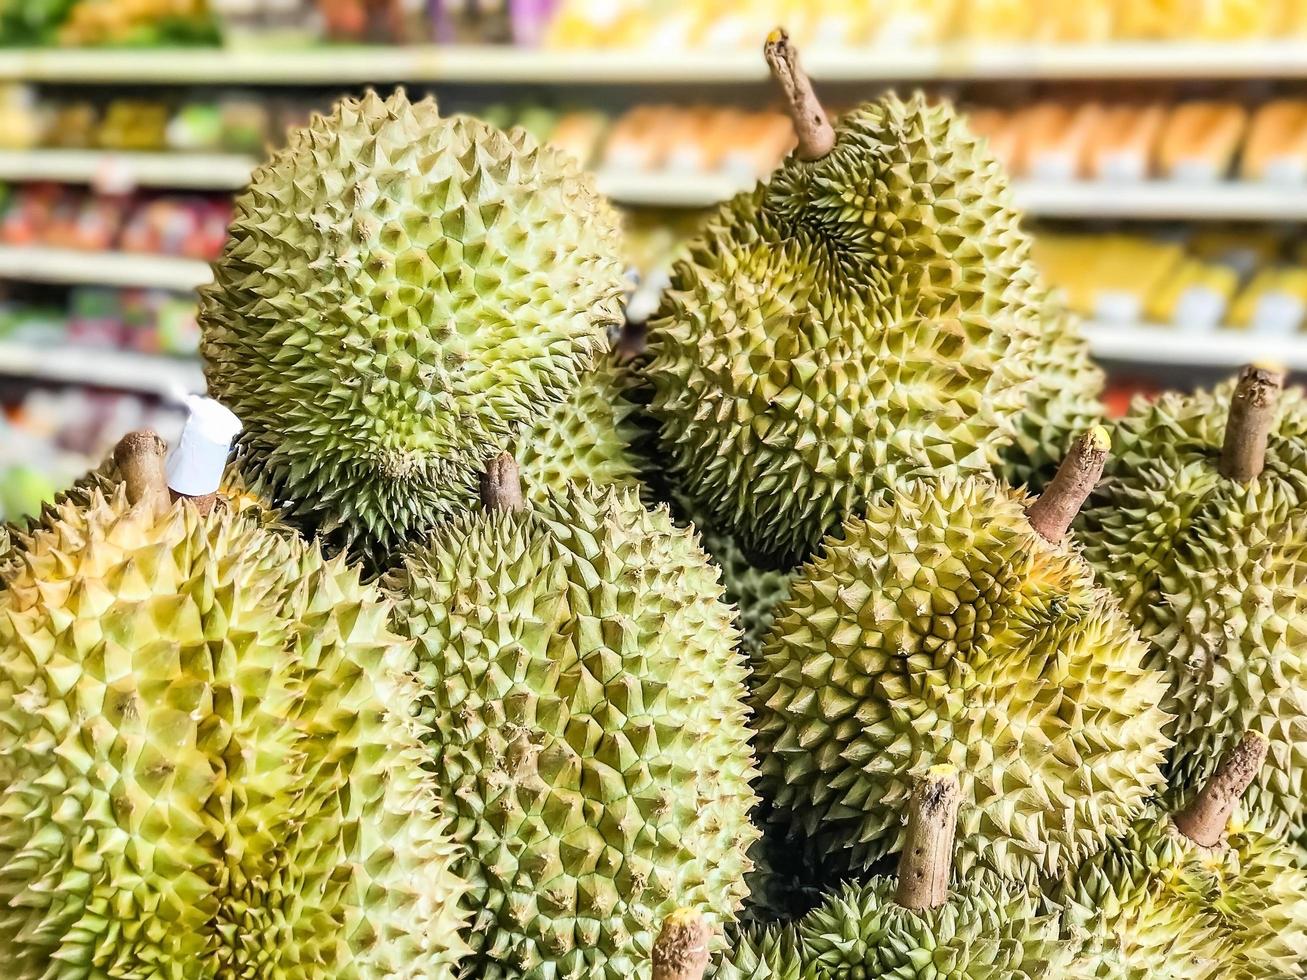 A plie of durians in a supermarket photo